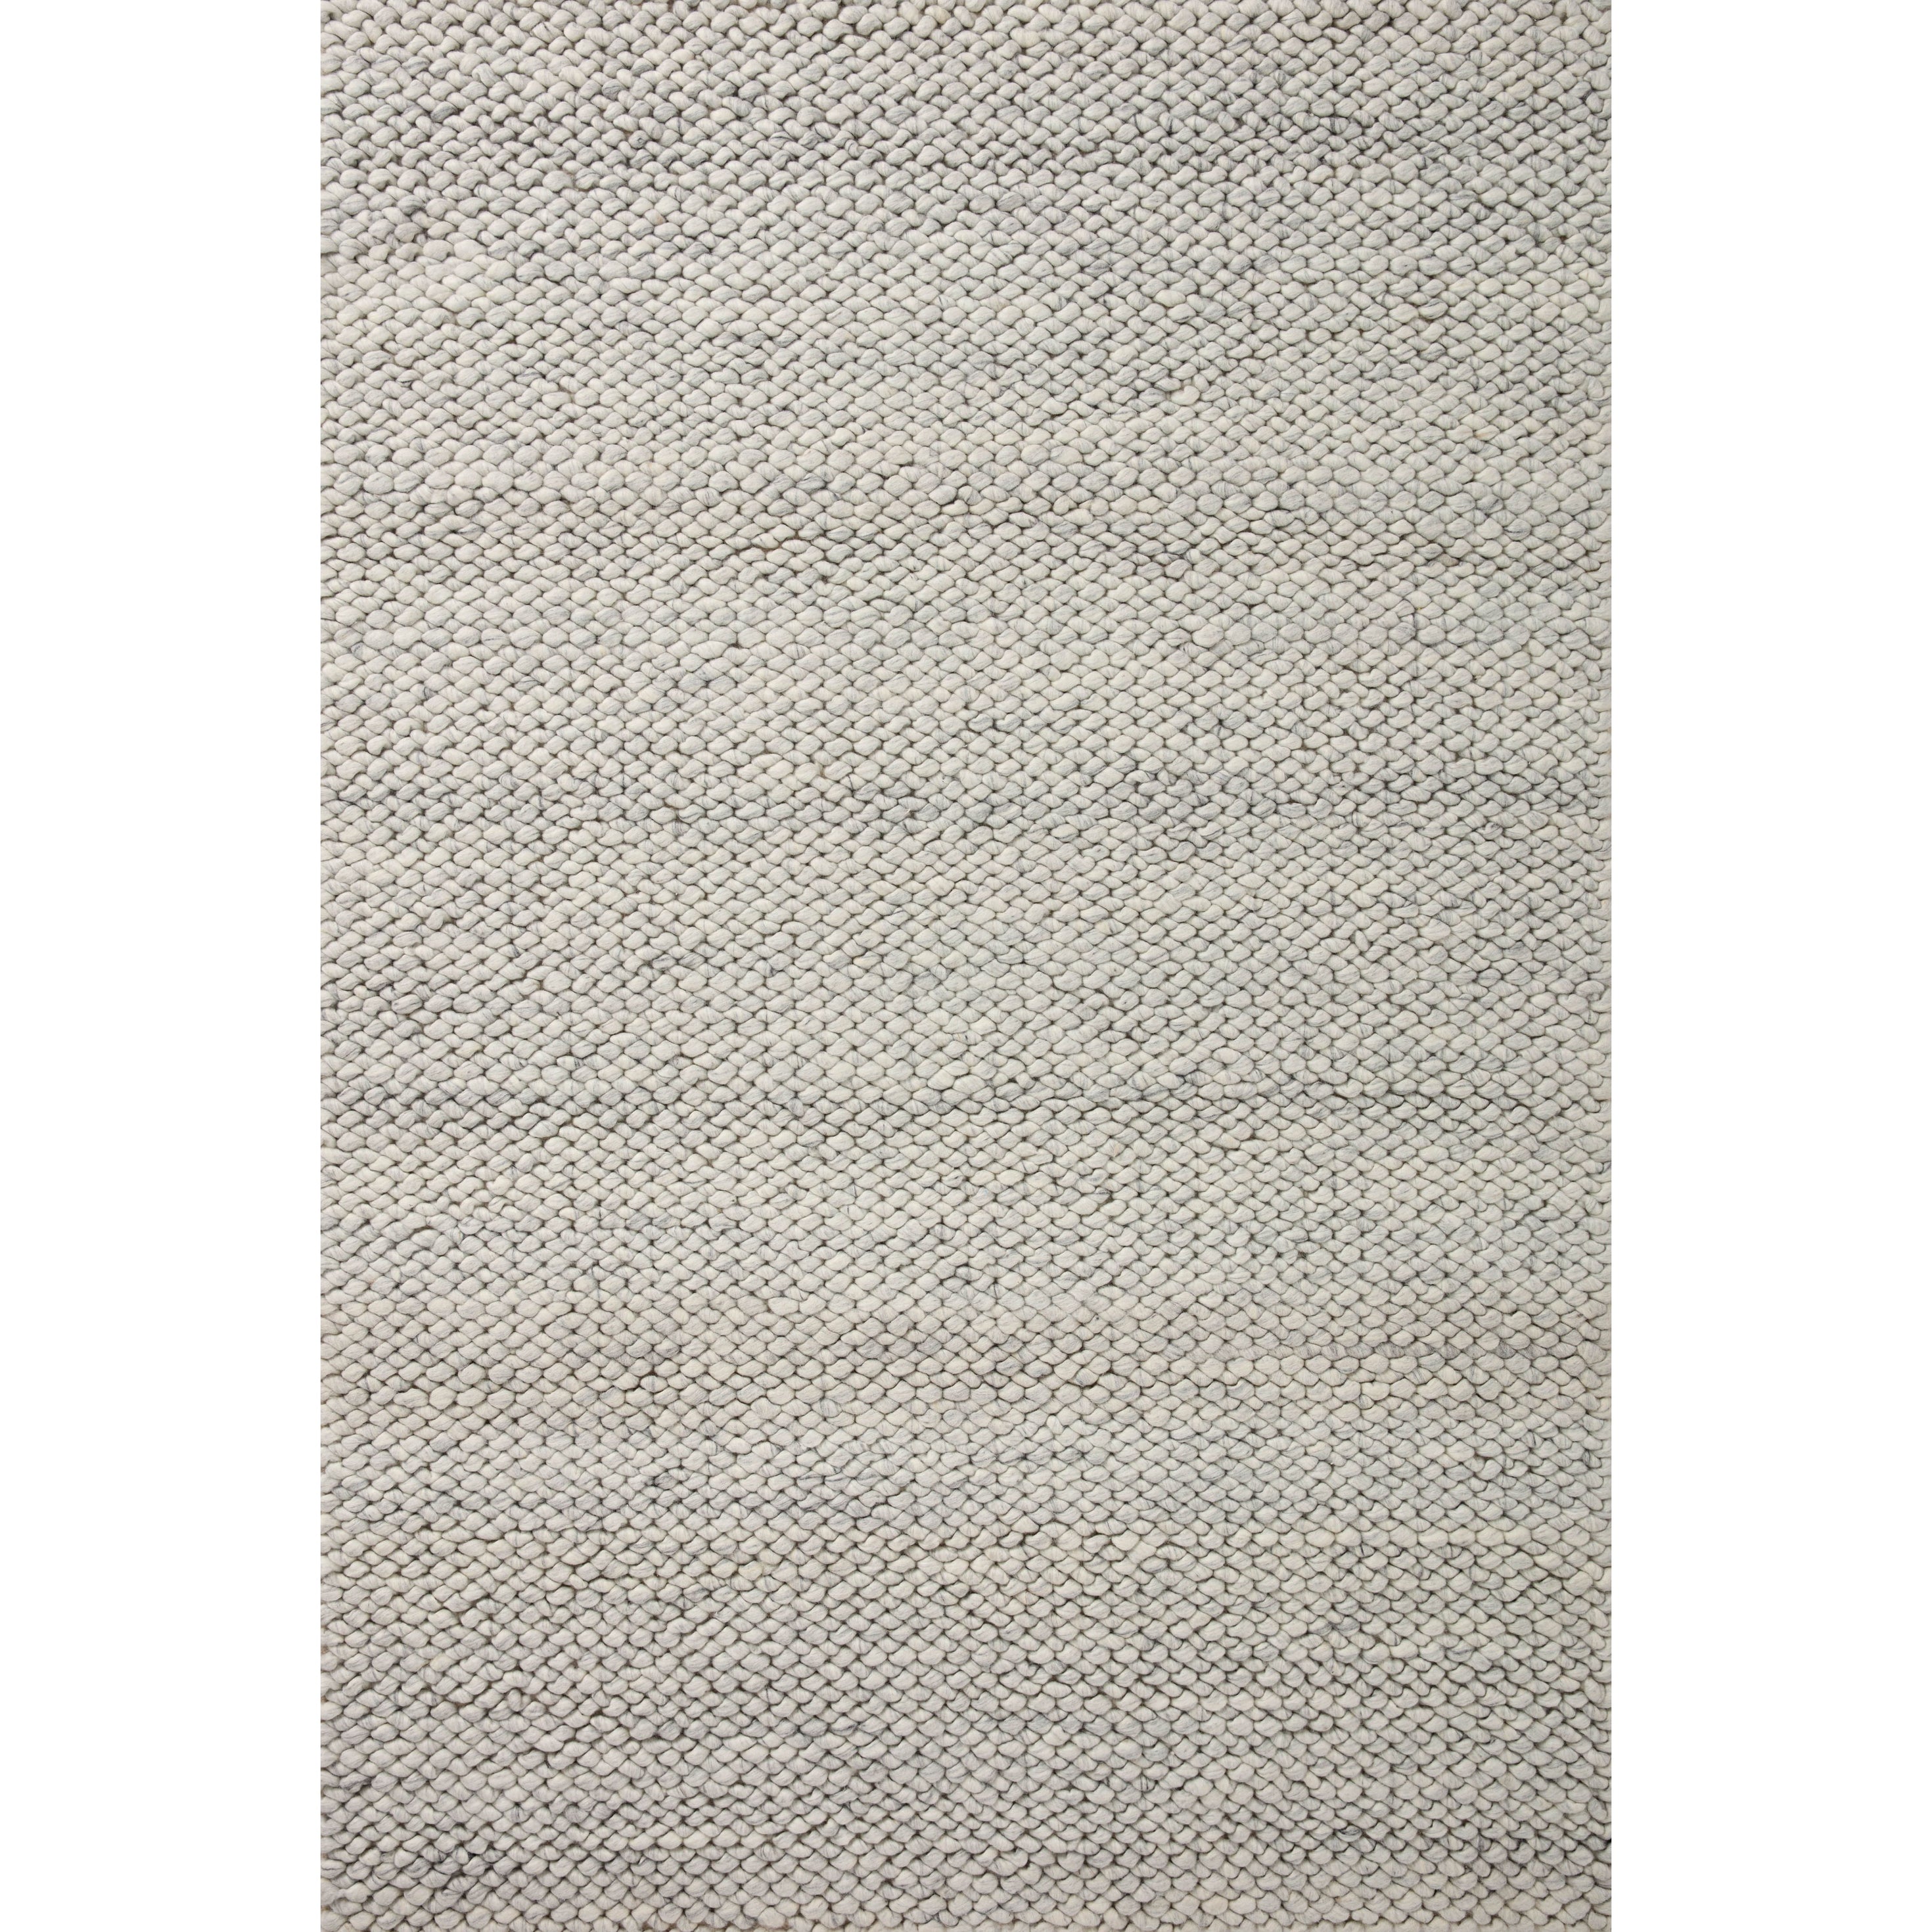 The Hendrick Ivory Rug is a beautifully textured wool area rug with an elevated ease reminiscent of a cozy handmade sweater. The rug is very plush underfoot, making it equally welcome in bedrooms and living rooms. The hand-woven weave pattern adds dimension while the rug’s color palette is soft, neutral, and serene. Amethyst Home provides interior design, new construction, custom furniture, and area rugs in the Alpharetta metro area.